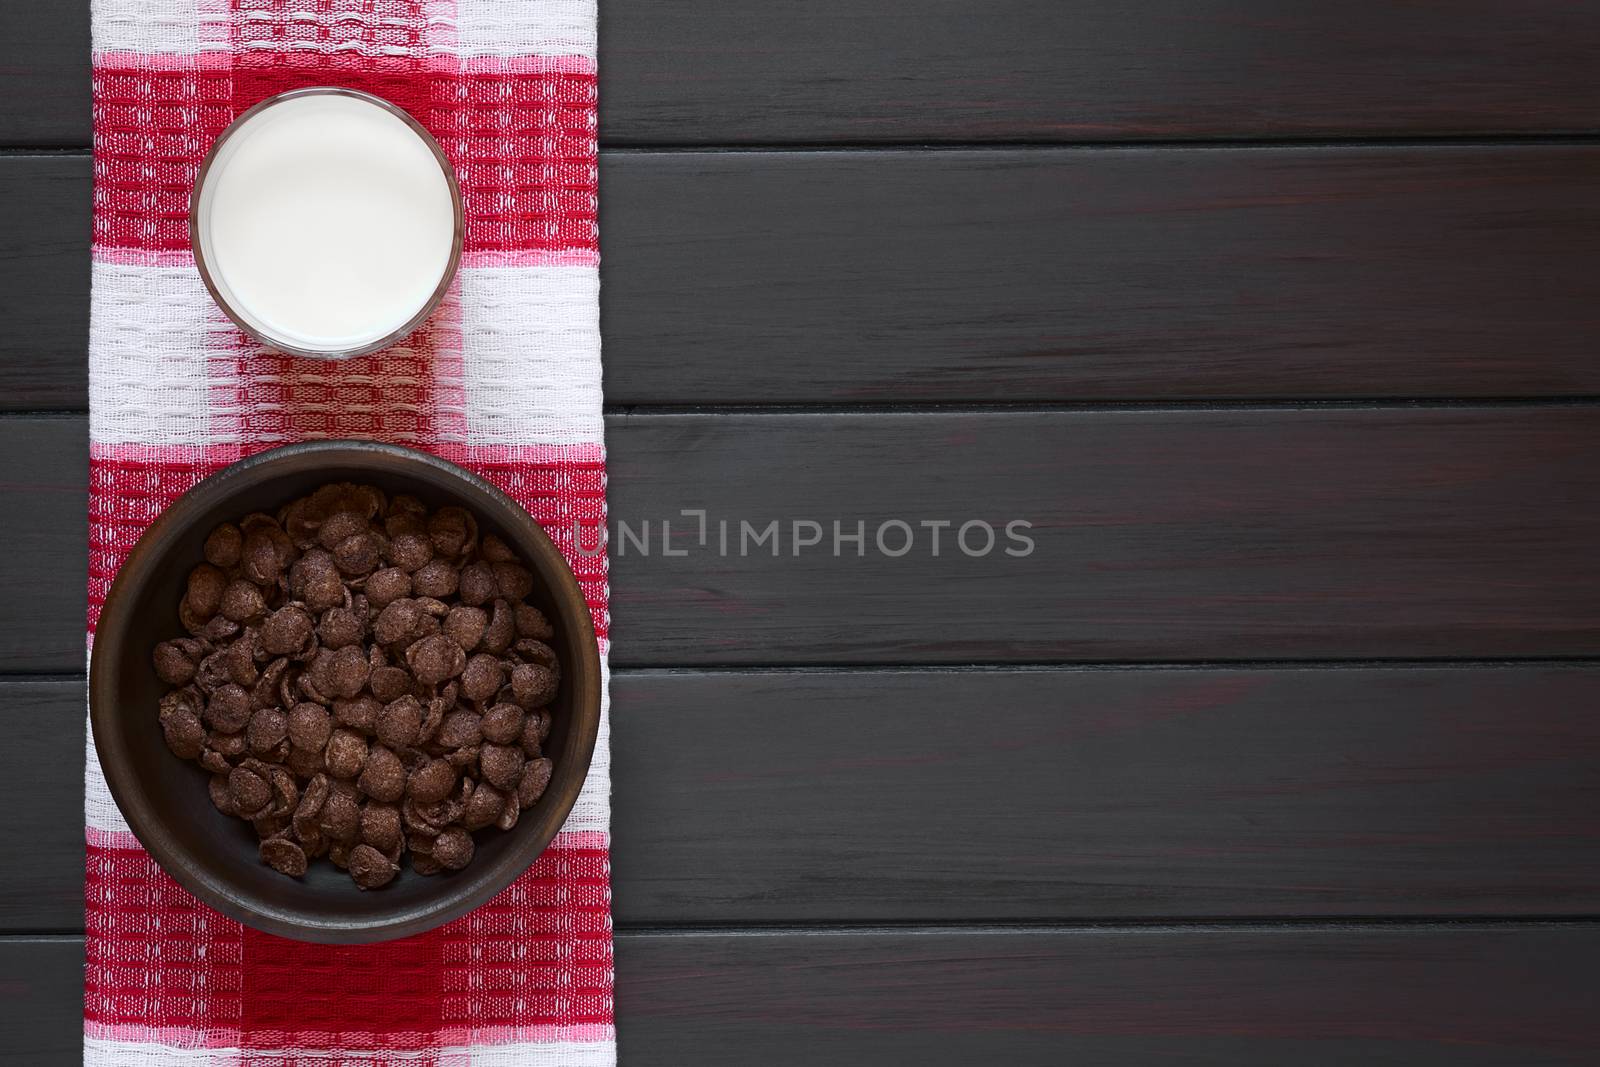 Crispy chocolate corn flakes breakfast cereal in rustic bowl with a glass of milk, photographed overhead on dark wood with natural light